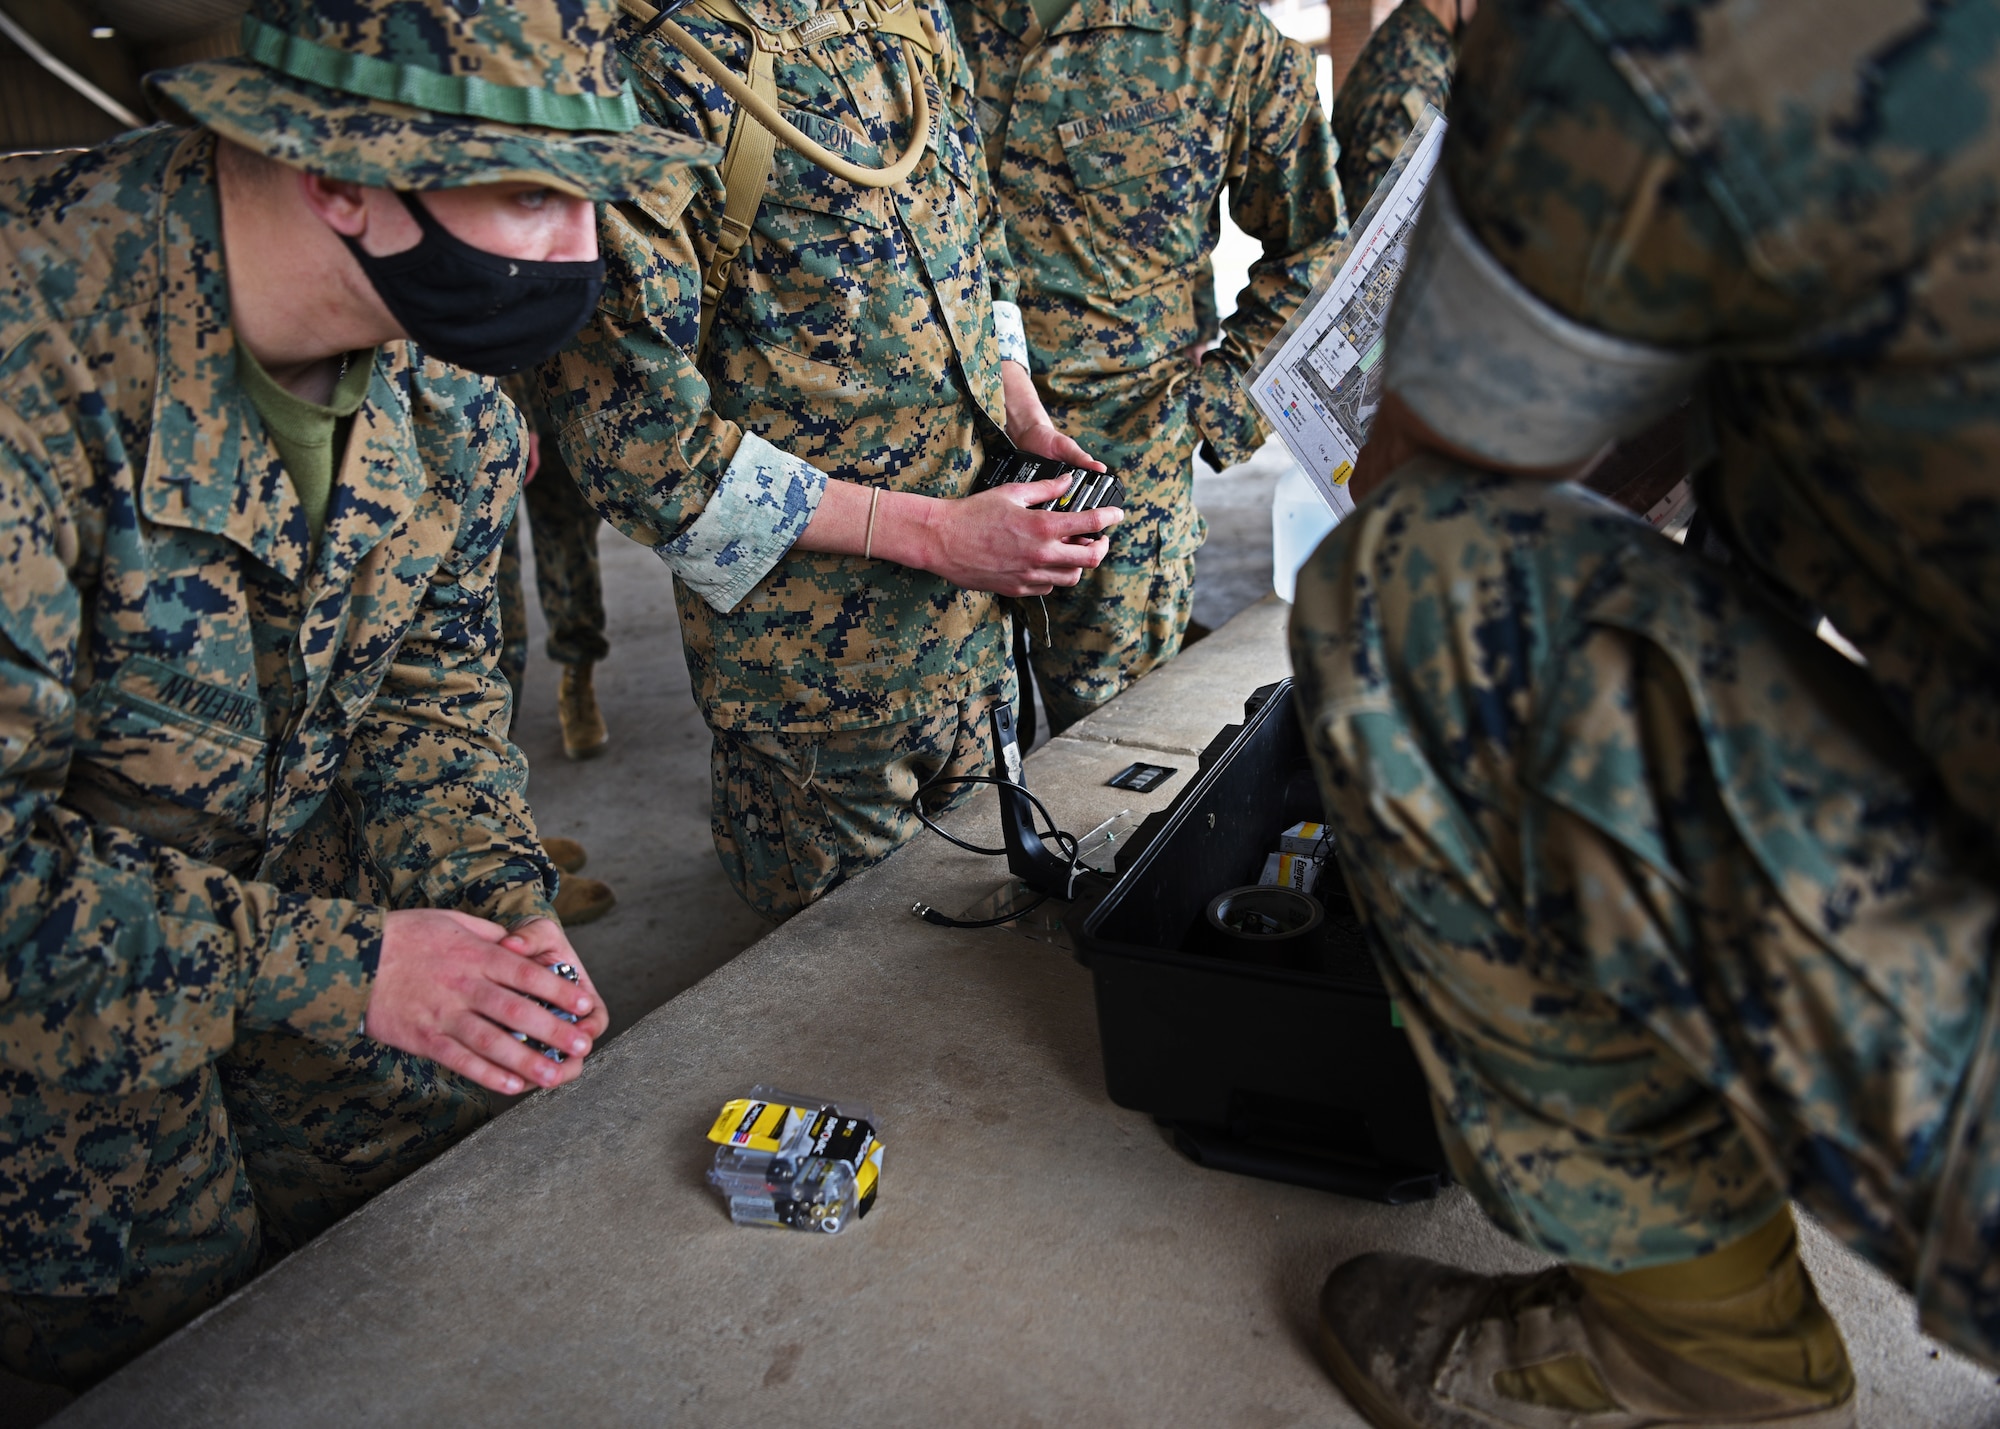 U.S. Marine Corps Tactical Signals Intelligence Operator course students from the Marine Corps Detachment, prepare intelligence equipment for a field exercise outside of the MCD dormitories on Goodfellow Air Force Base, Texas, March 22, 2021. This field training was designed to deliver technically proficient, combat capable Marines to operating forces and supporting establishments. (U.S. Air Force photo by Senior Airman Abbey Rieves)